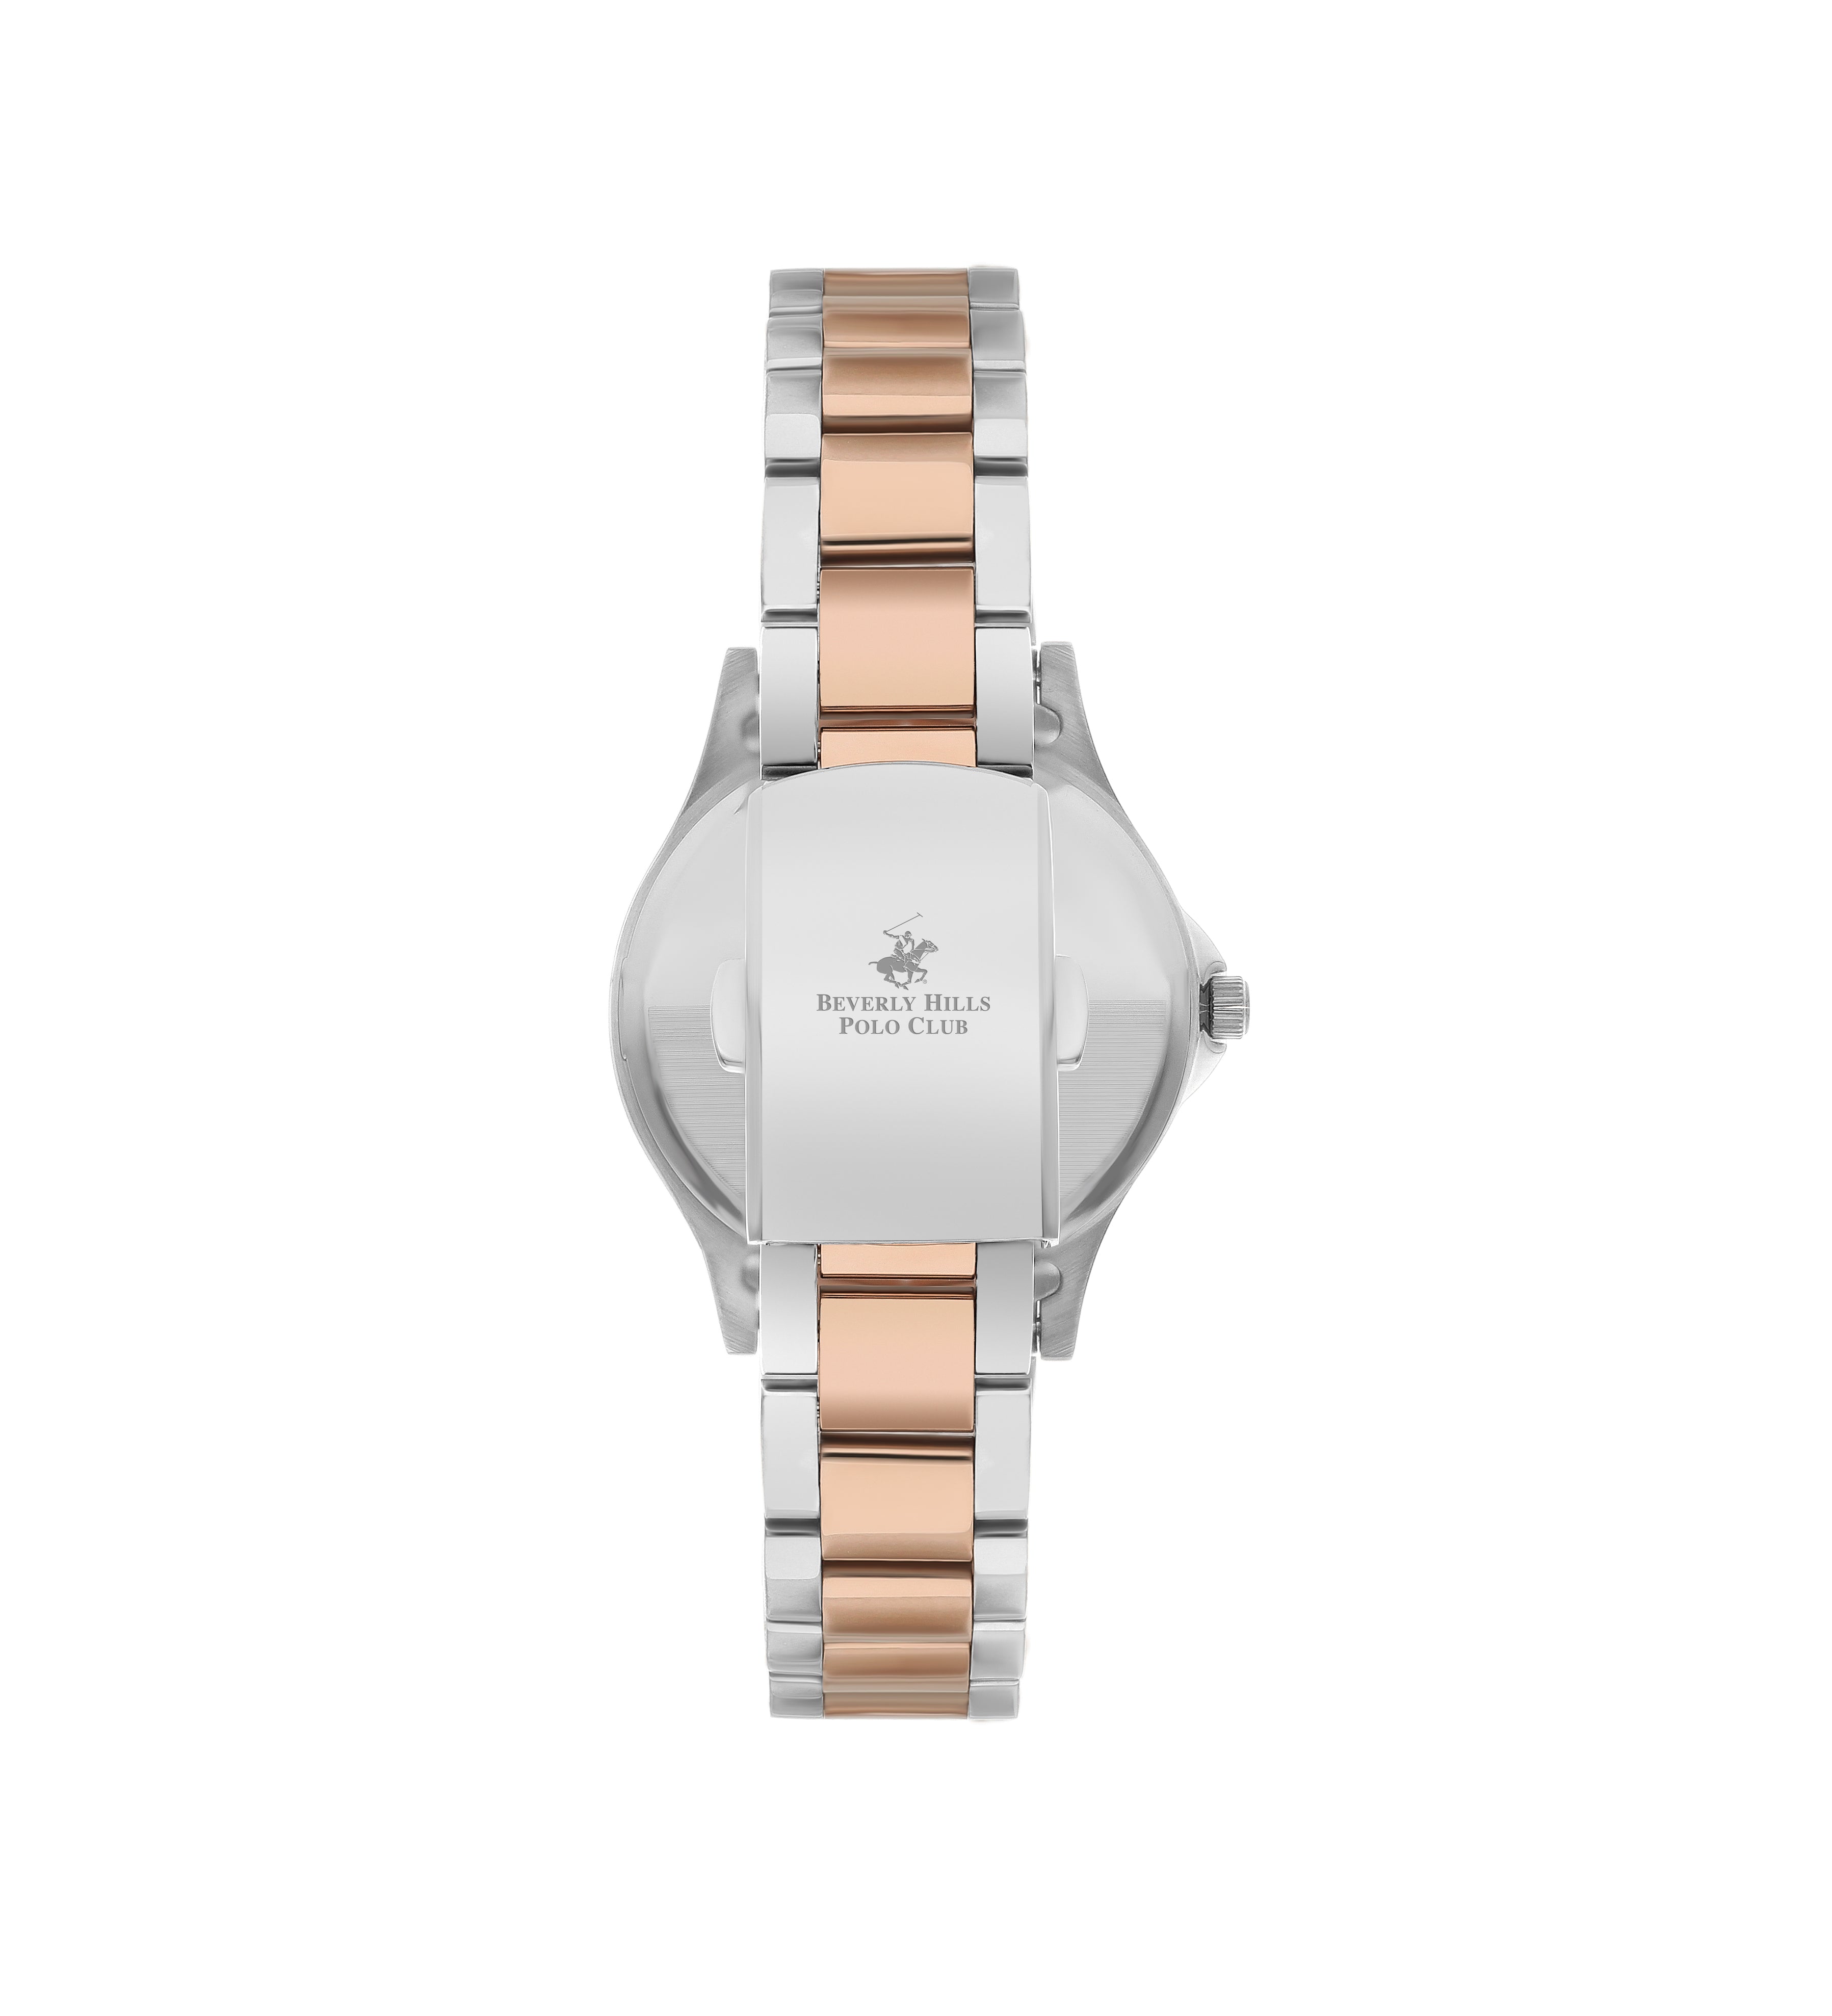 Polo - BP3241X.520 - Ladies Stainless Steel Watch